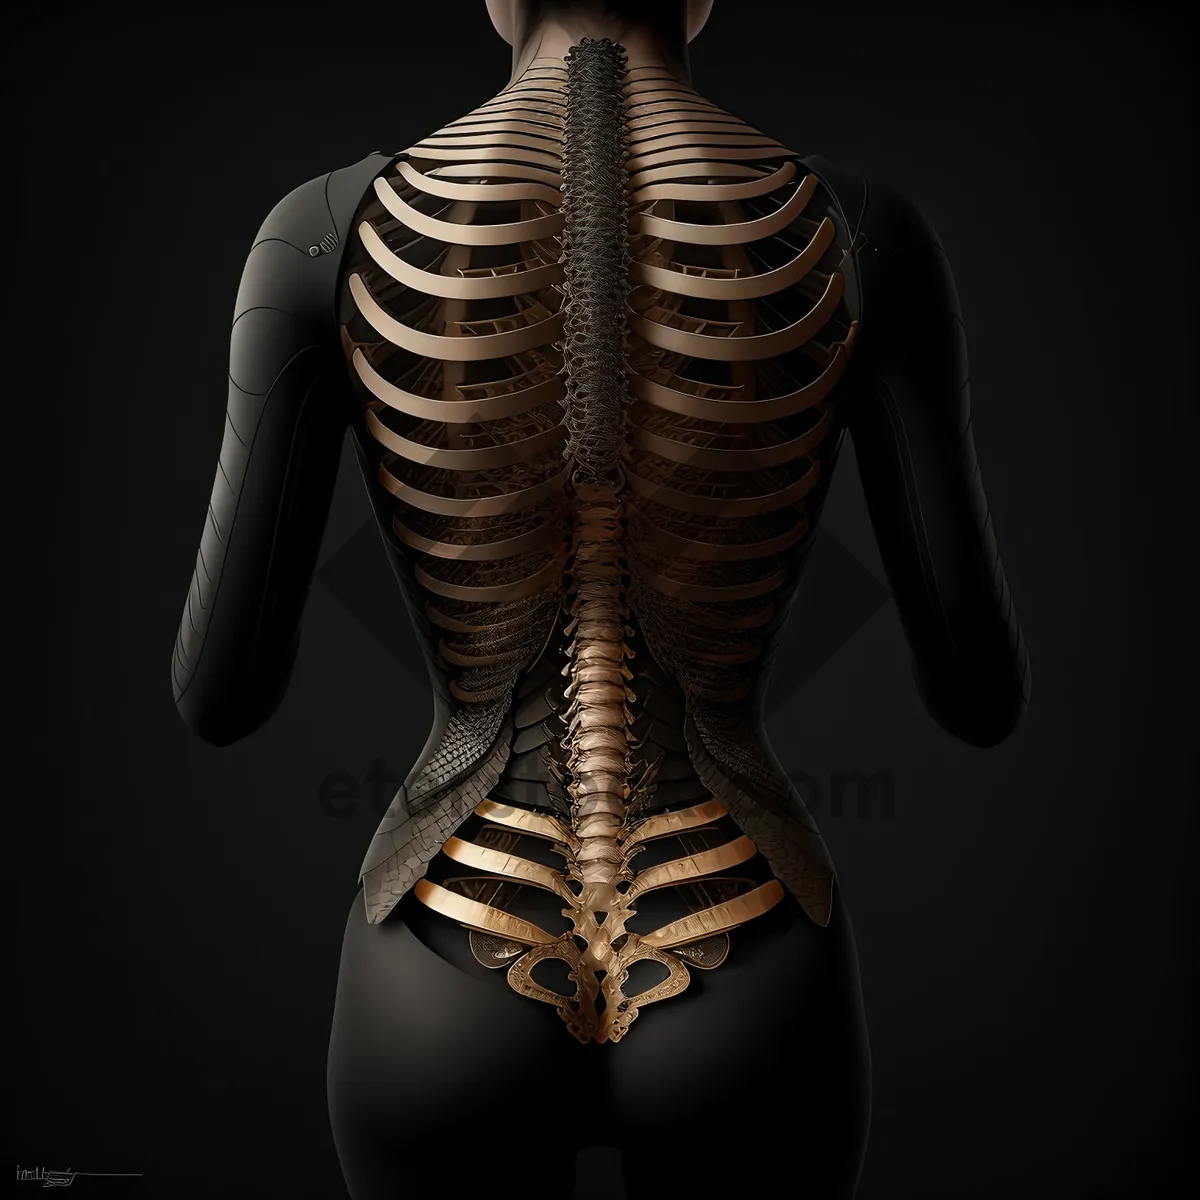 Picture of Anatomical Skeleton X-Ray - 3D Graphic